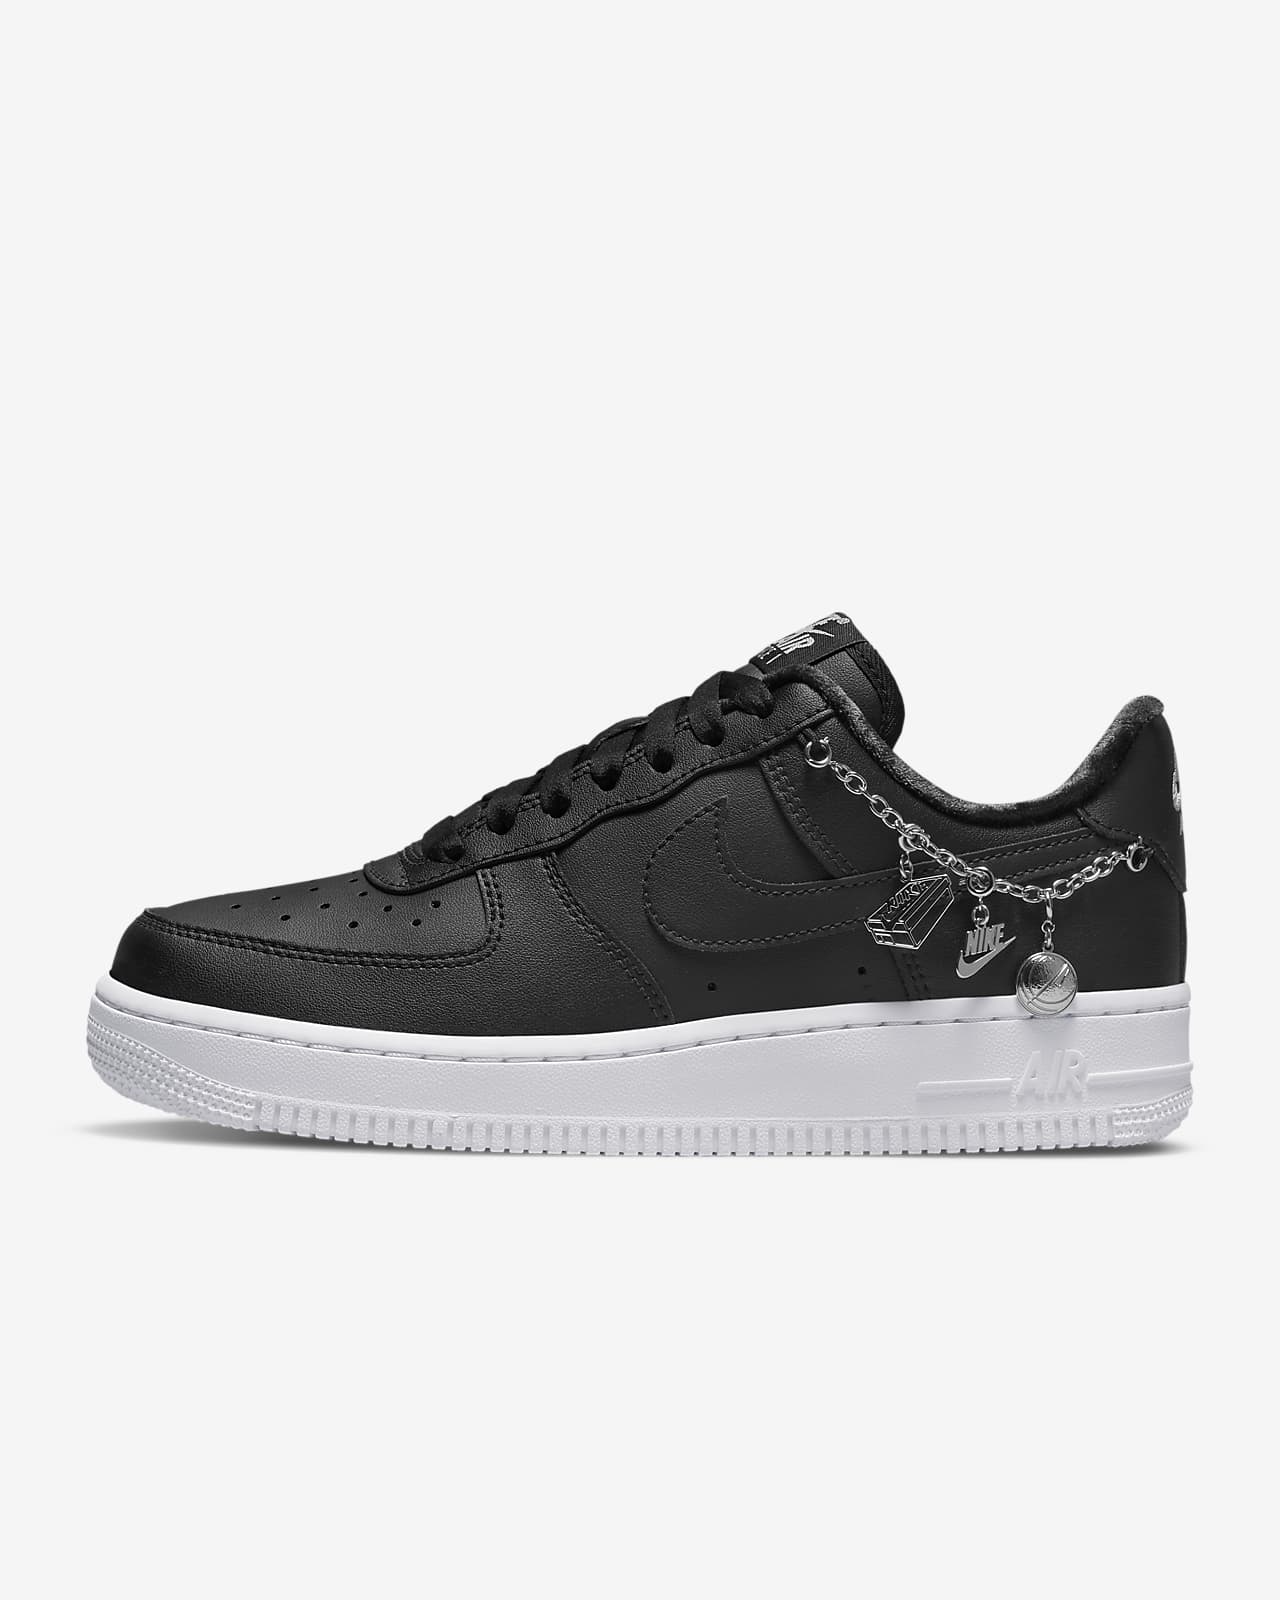 Chaussures Nike Air Force 1 '07 LX pour Femme